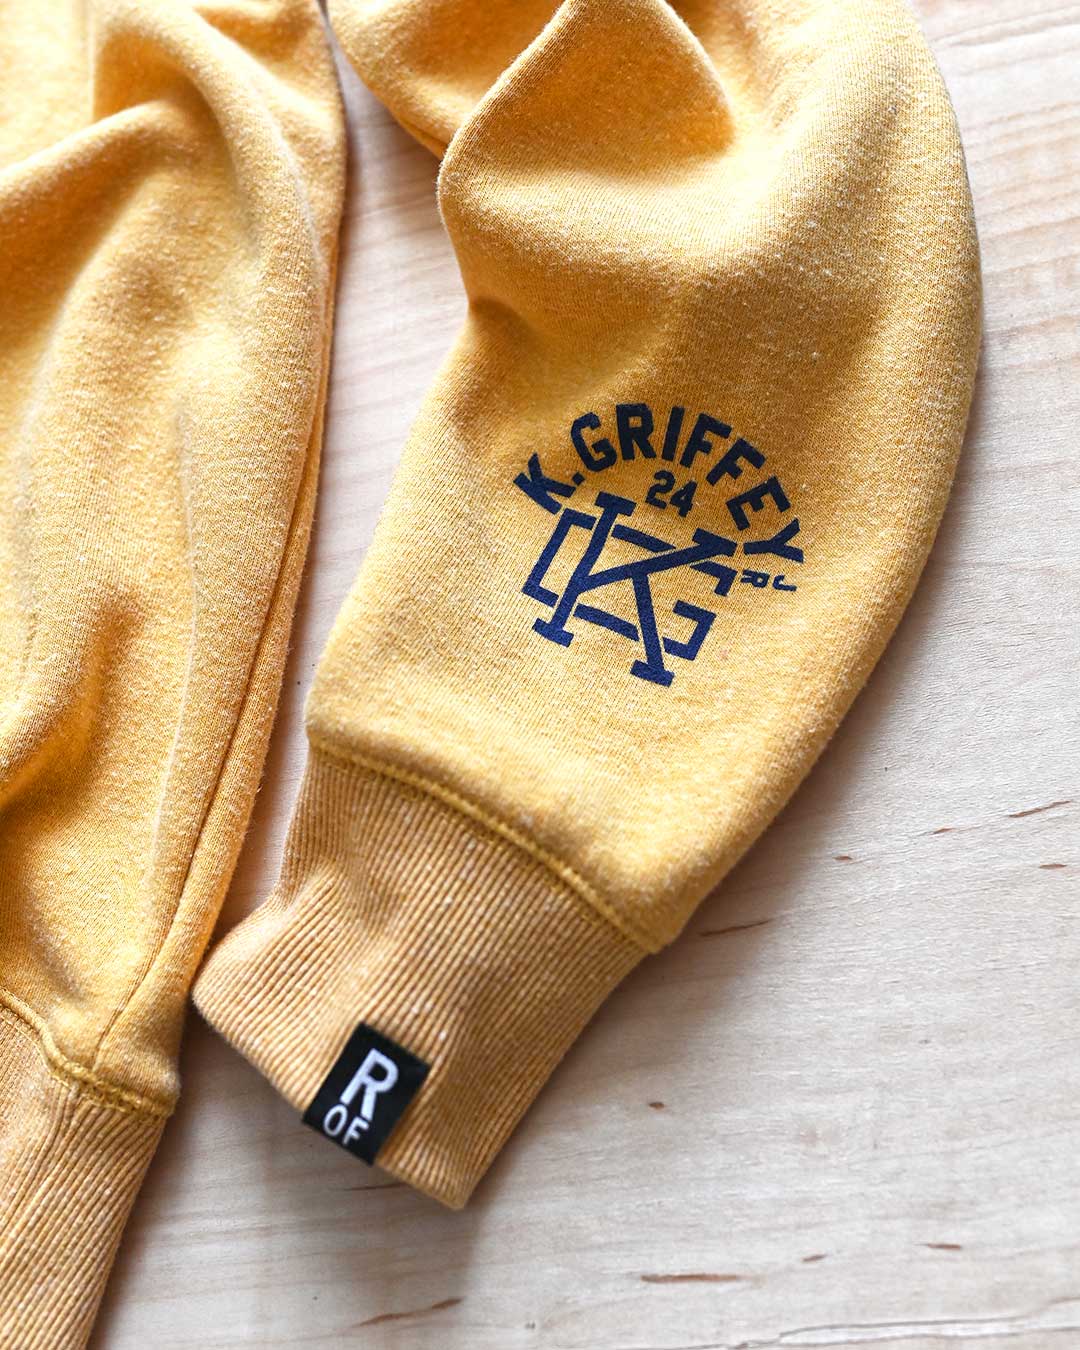 Ken Griffey Jr. &#39;The Kid&#39; Yellow PO Hoody - Roots of Fight Canada